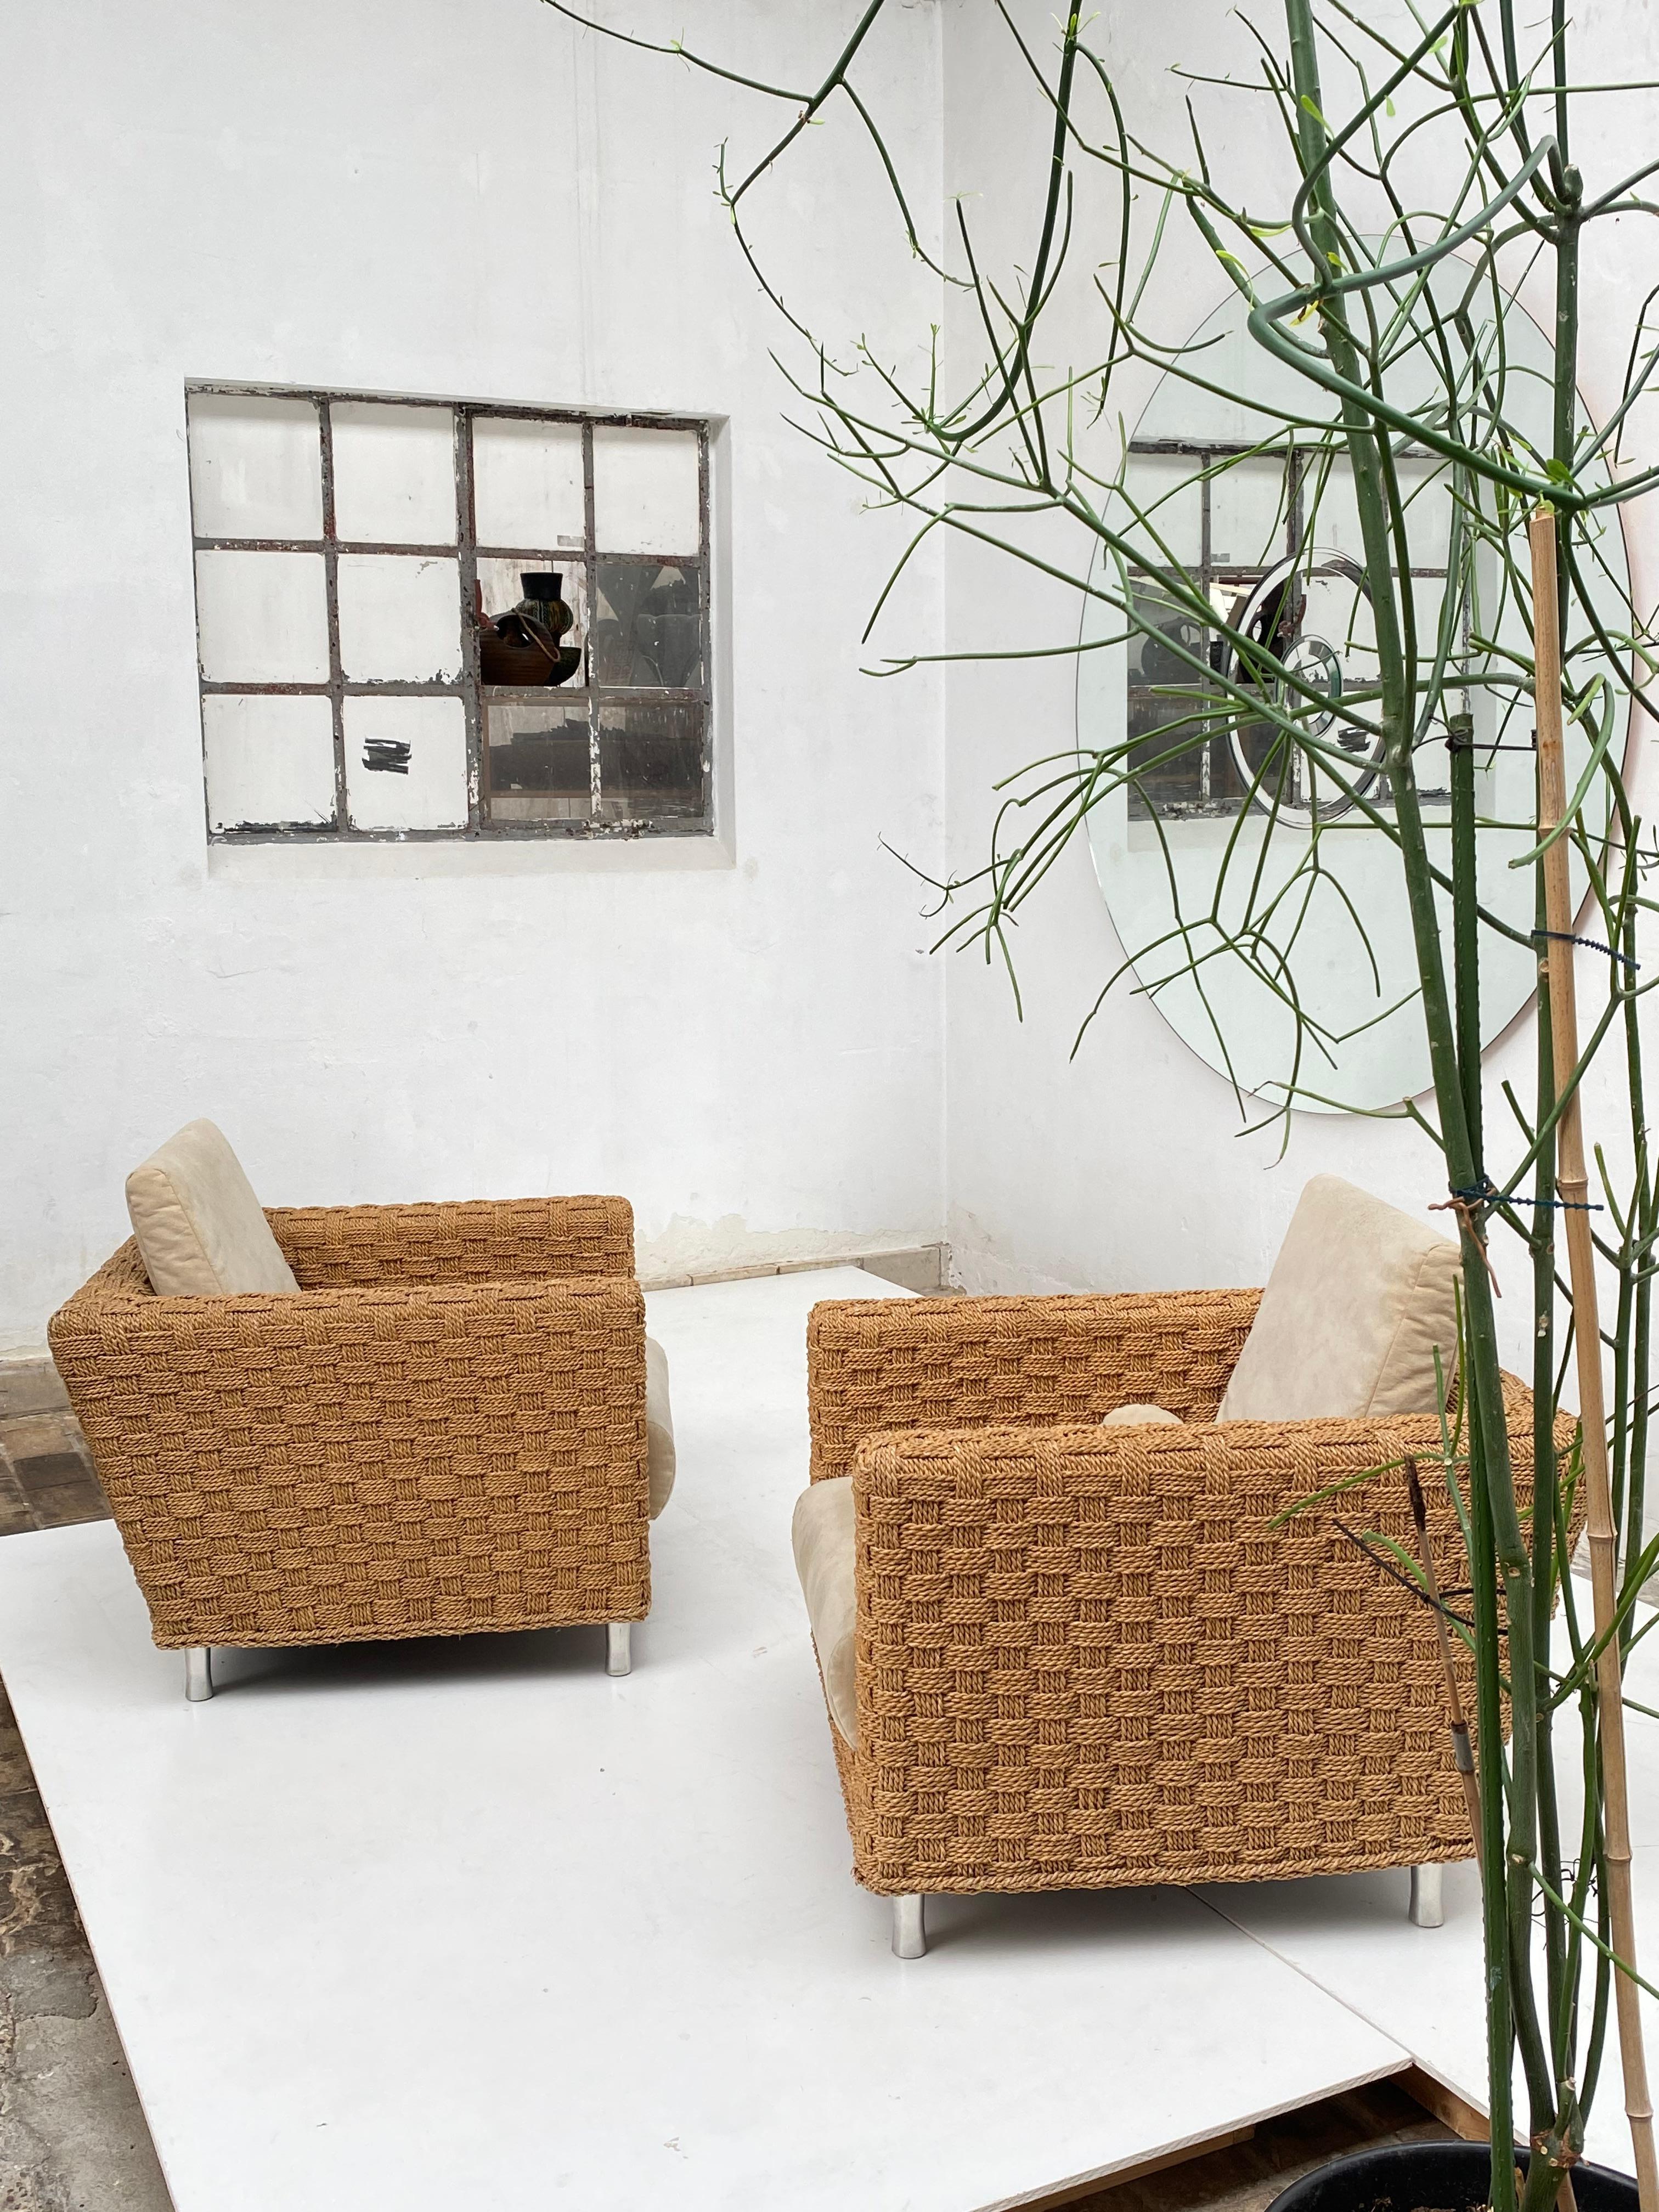 Stunning pair of French Woven Hemp Rope lounge chairs 'Wicky' by Didier Gomez for Ligne Roset France 1990's

Extremely comfortable chair with down filled removable cushions 

The Faux Suede Alcantara fabric can easily zip off and be changed to suit